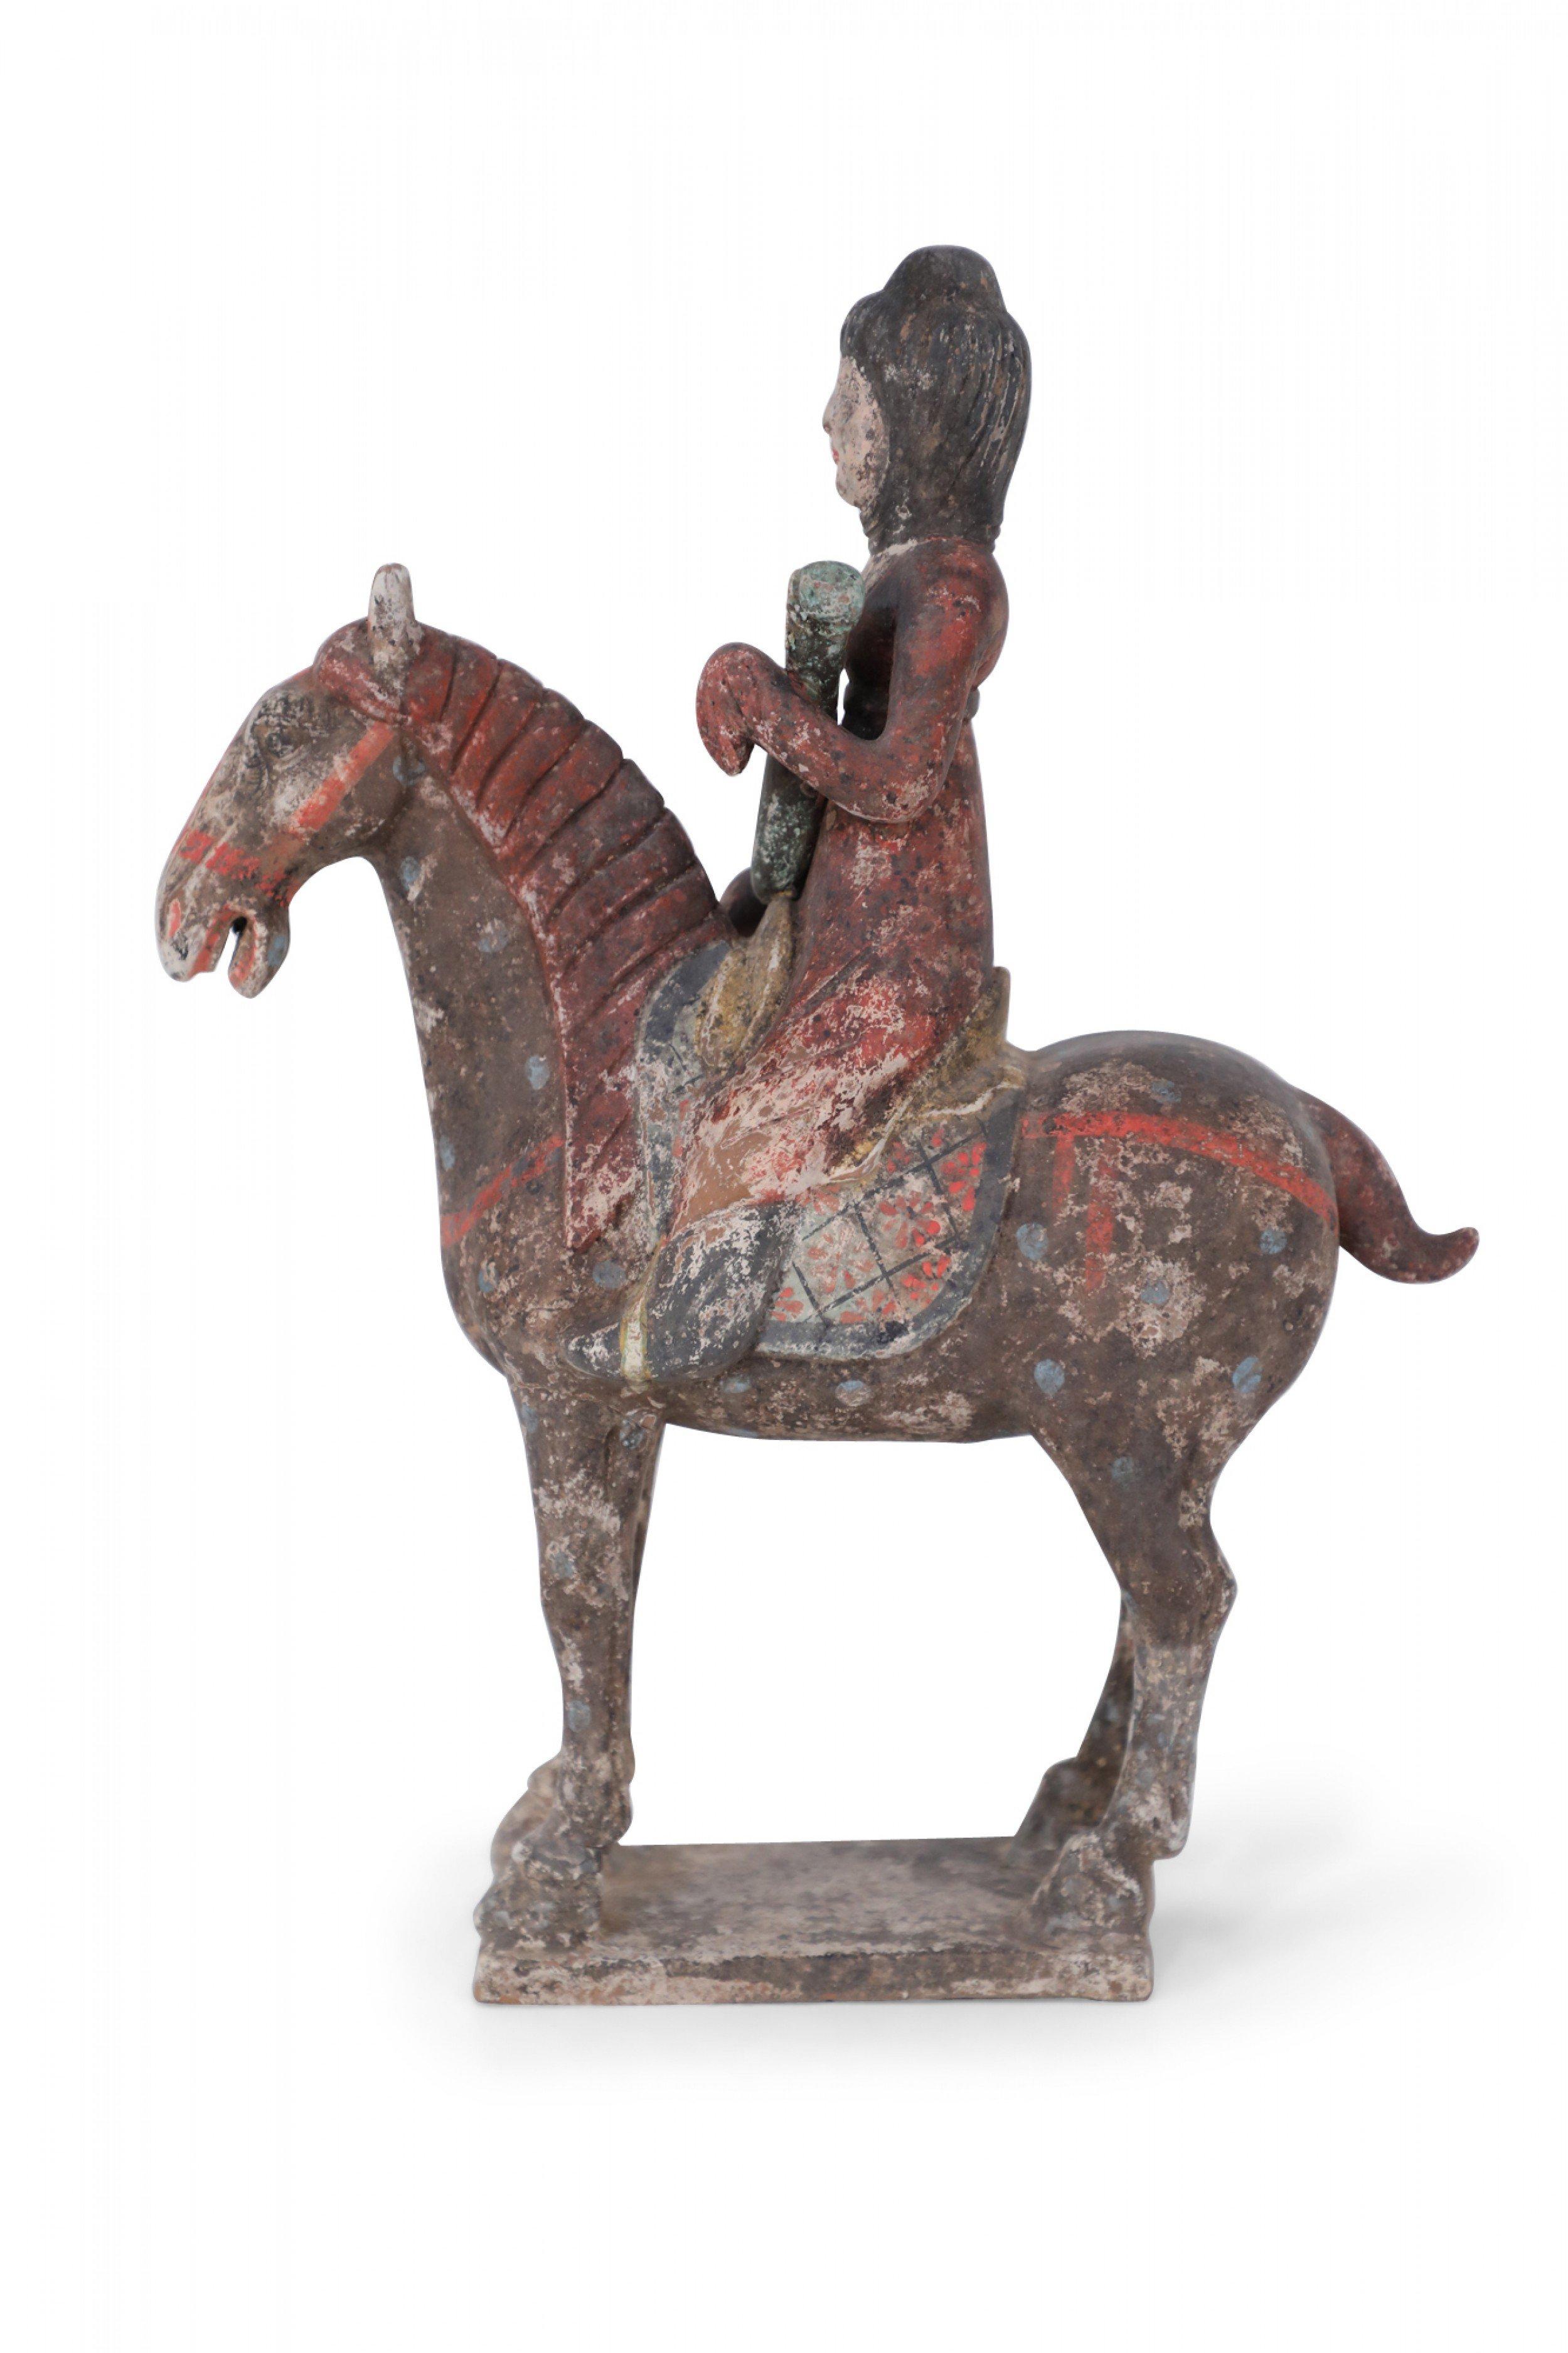 Antique Chinese Tang Dynasty-style terracotta tomb figure of a girl in a red garment holding an object riding a dark brown horse, standing on a textured base.
 